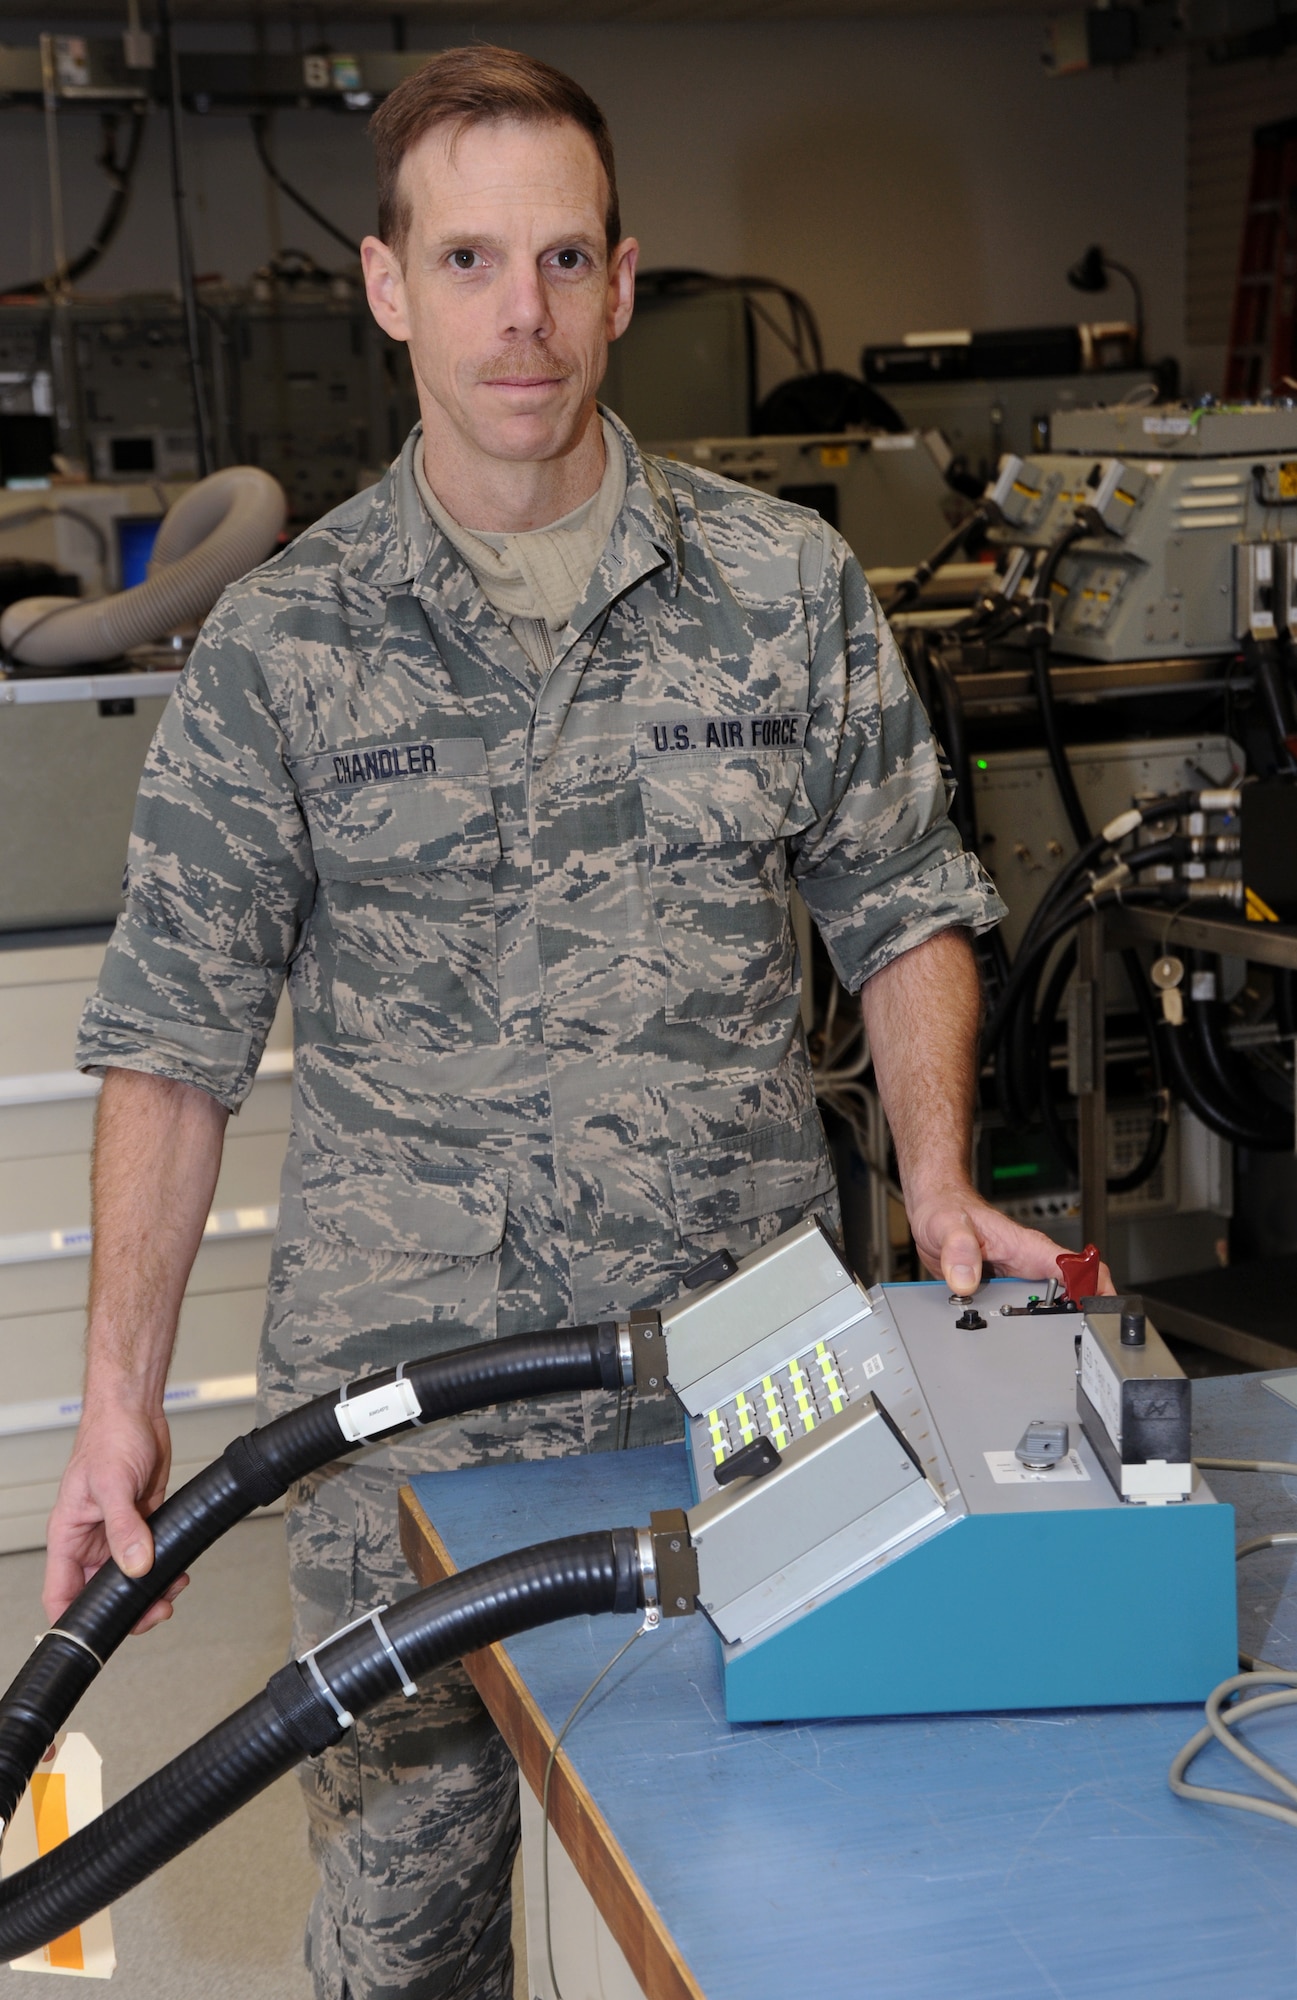 Oregon Air National Guard Master Sgt. Michael Chandler, 142nd Fighter Wing Aircraft Maintenance avionics back shop technician, displays the AW Cable Tester he designed that recently was submitted to the U.S. Air Force, "Every Dollar Counts." campaign and was awarded $5,000.00., Portland Air National Guard Base, Ore., Mar. 21, 2014. (U.S. Air National Guard photo by Tech. Sgt. John Hughel, 142nd Figher Wing Public Affairs/Released)